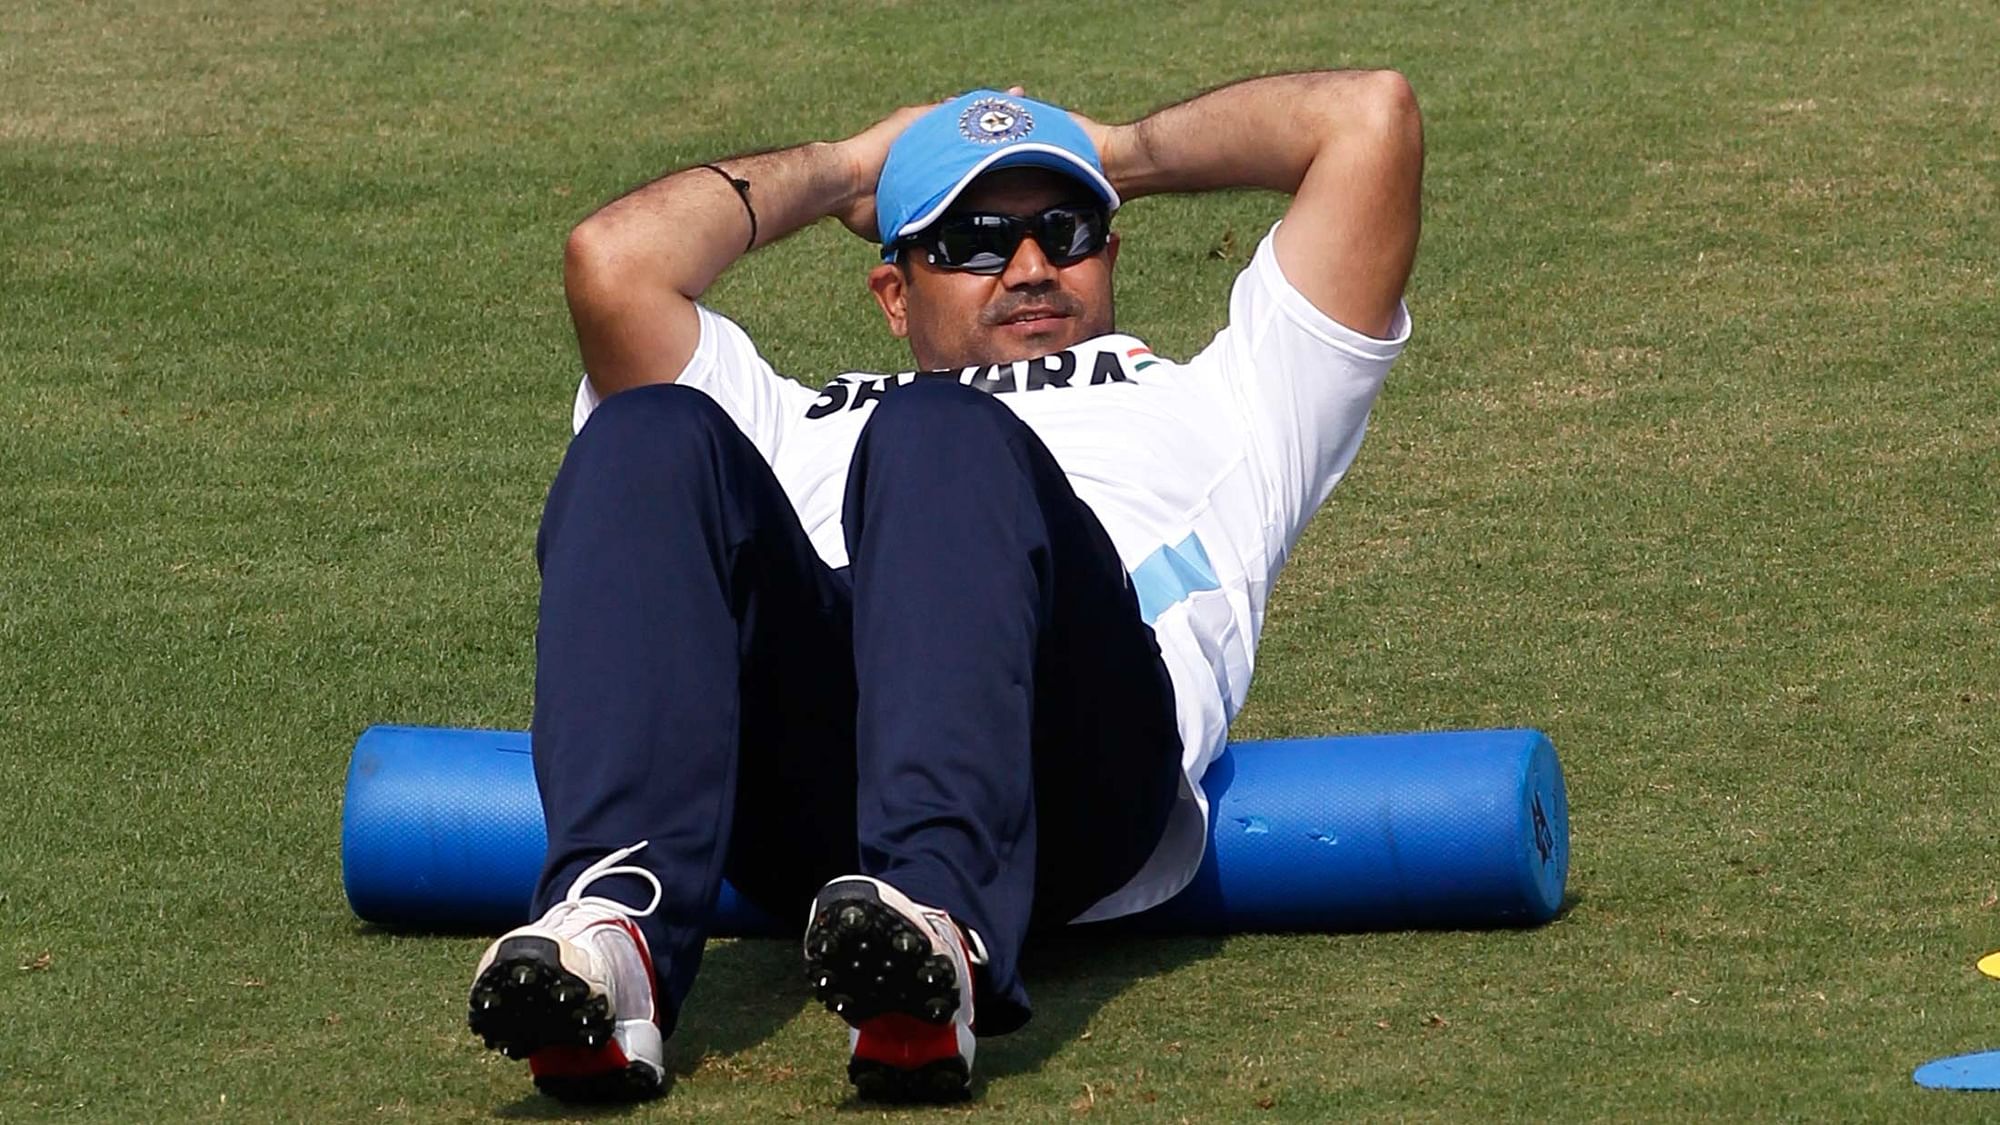 Sehwag’s witty posts have made him a Twitter darling in no time (Photo: Reuters)